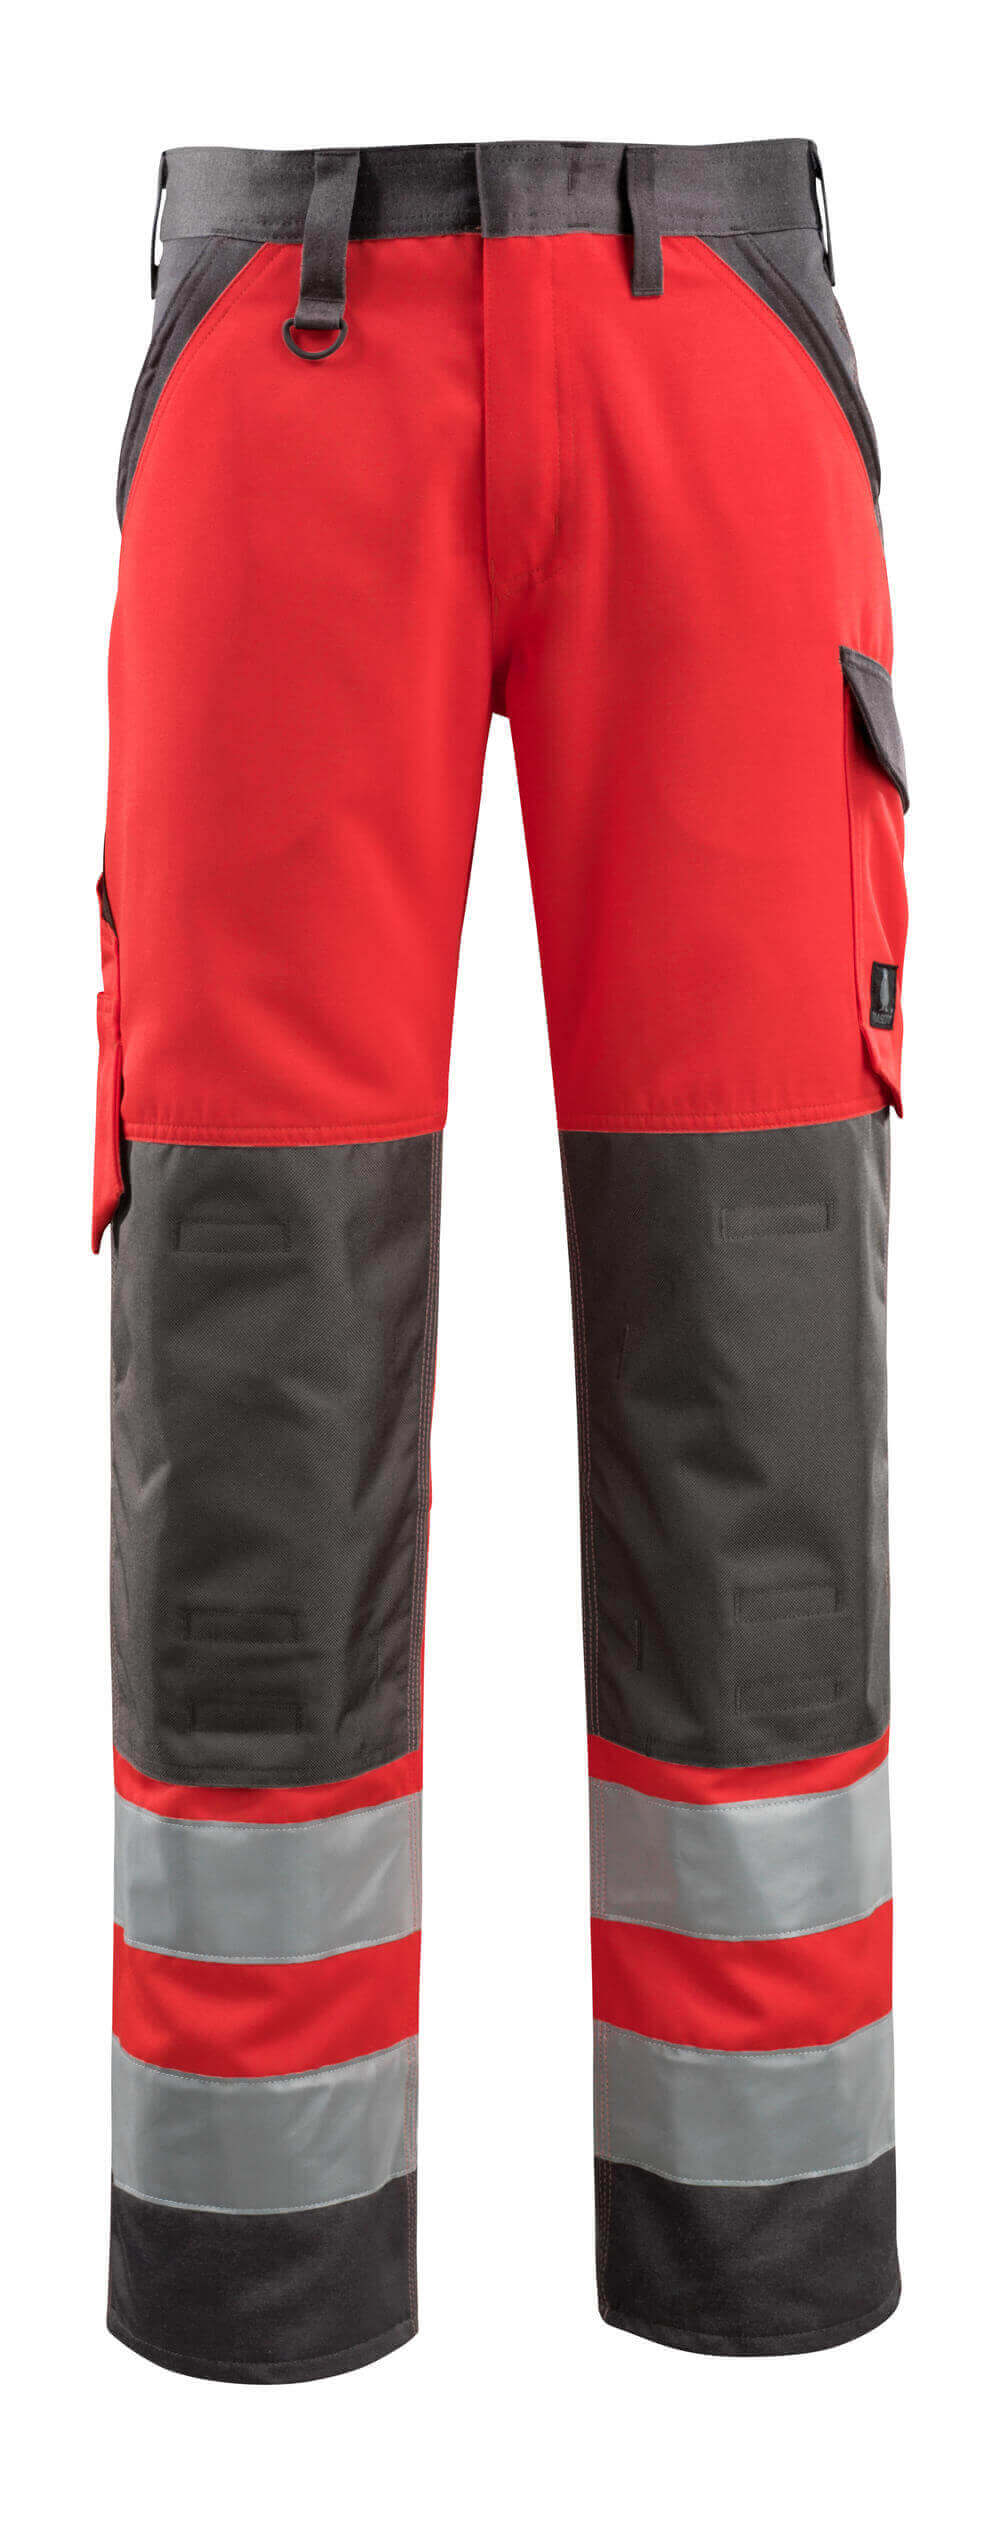 Mascot SAFE LIGHT  Maitland Trousers with kneepad pockets 15979 hi-vis red/dark anthracite